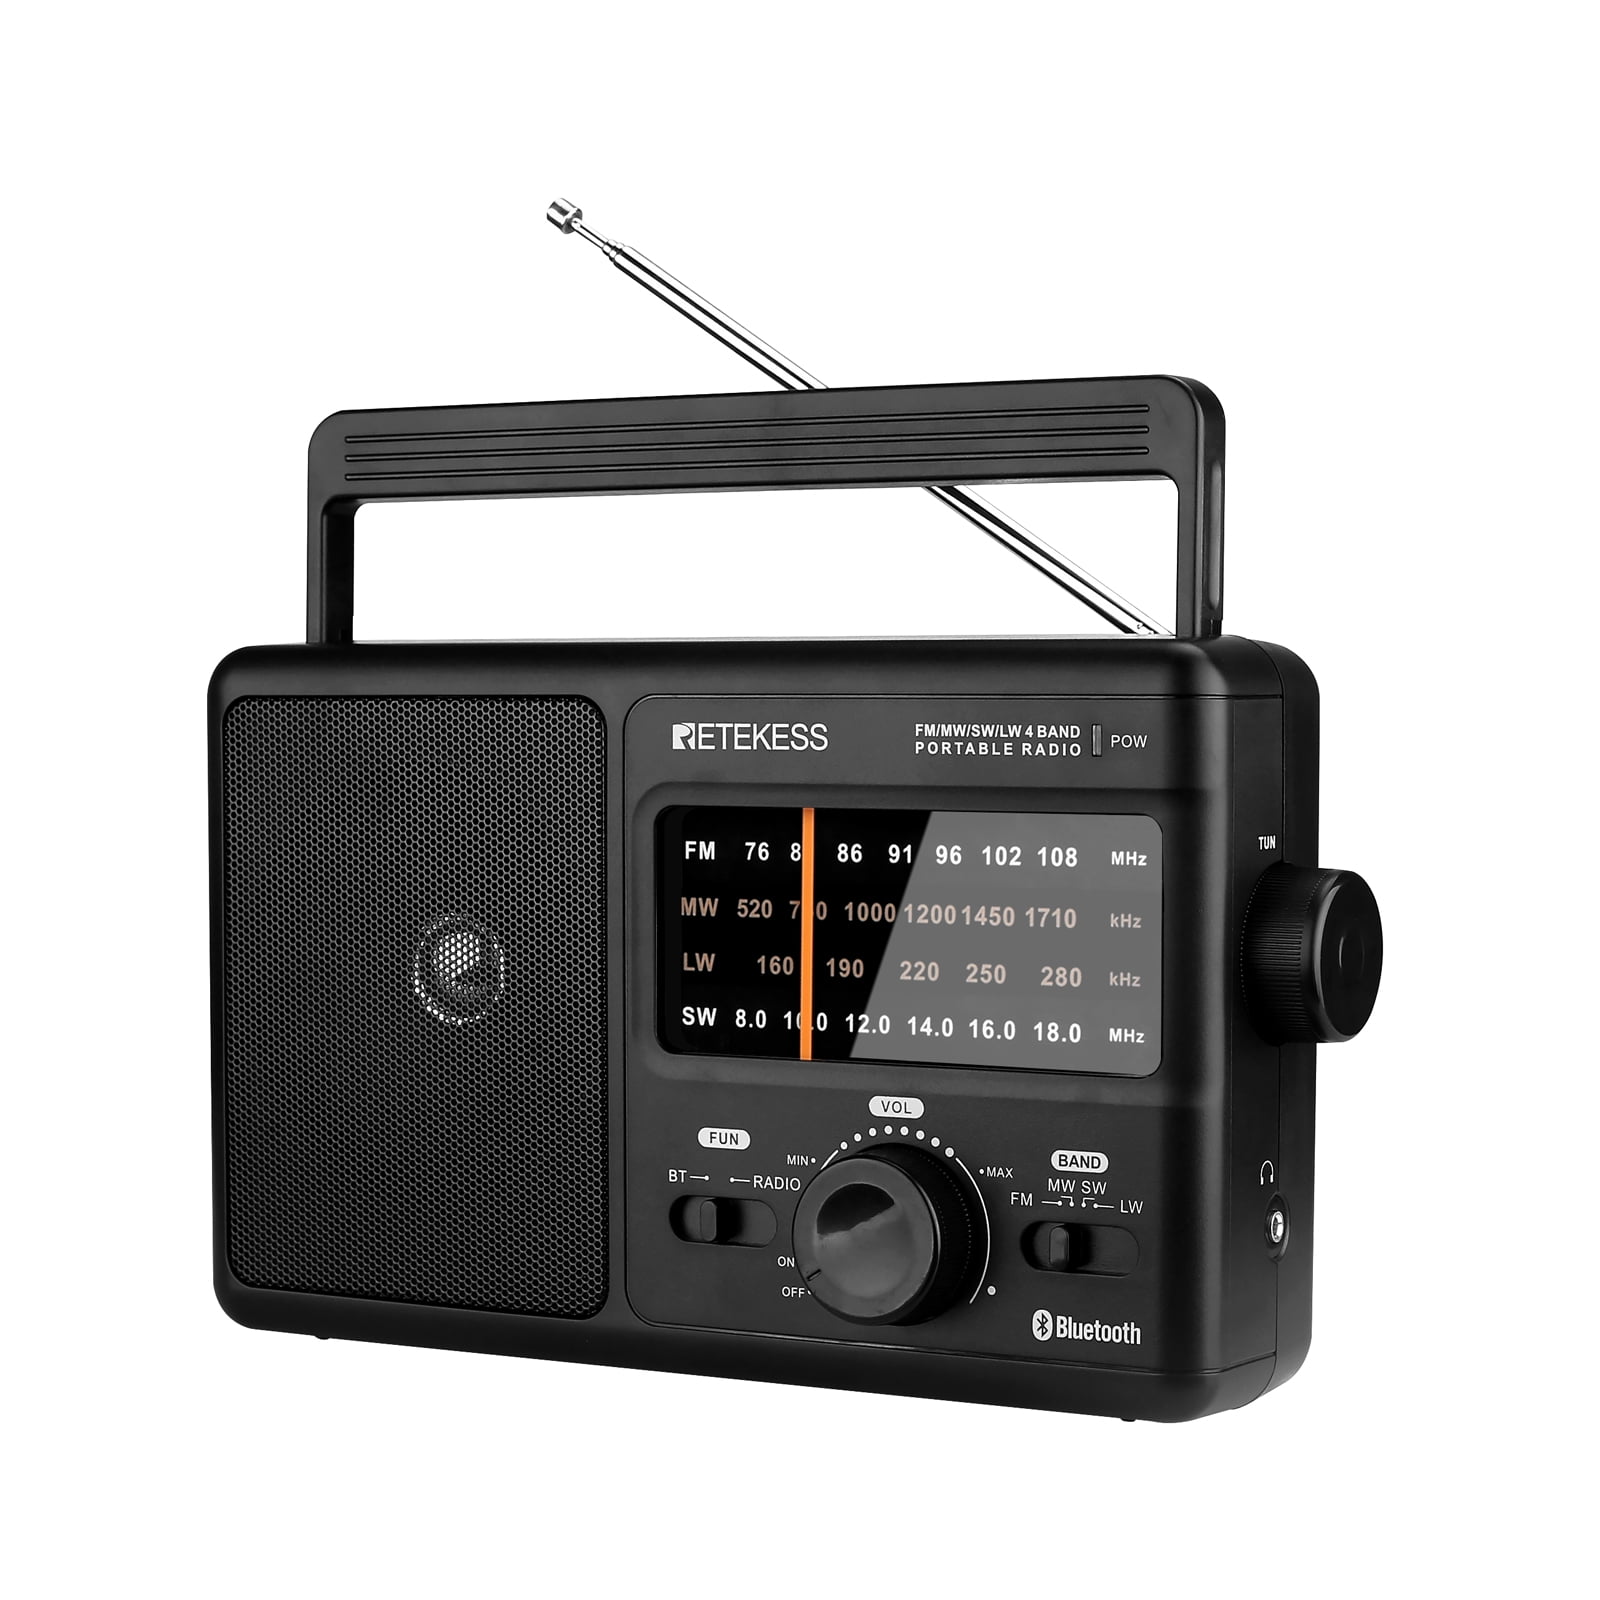 Retekess TR626 Portable AM FM Radio with Bluetooth, Plug in Radio, LW, DSP  chip,Powered by AC or D Battery, Short Wave Radios for  Garages,Home,Outdoors